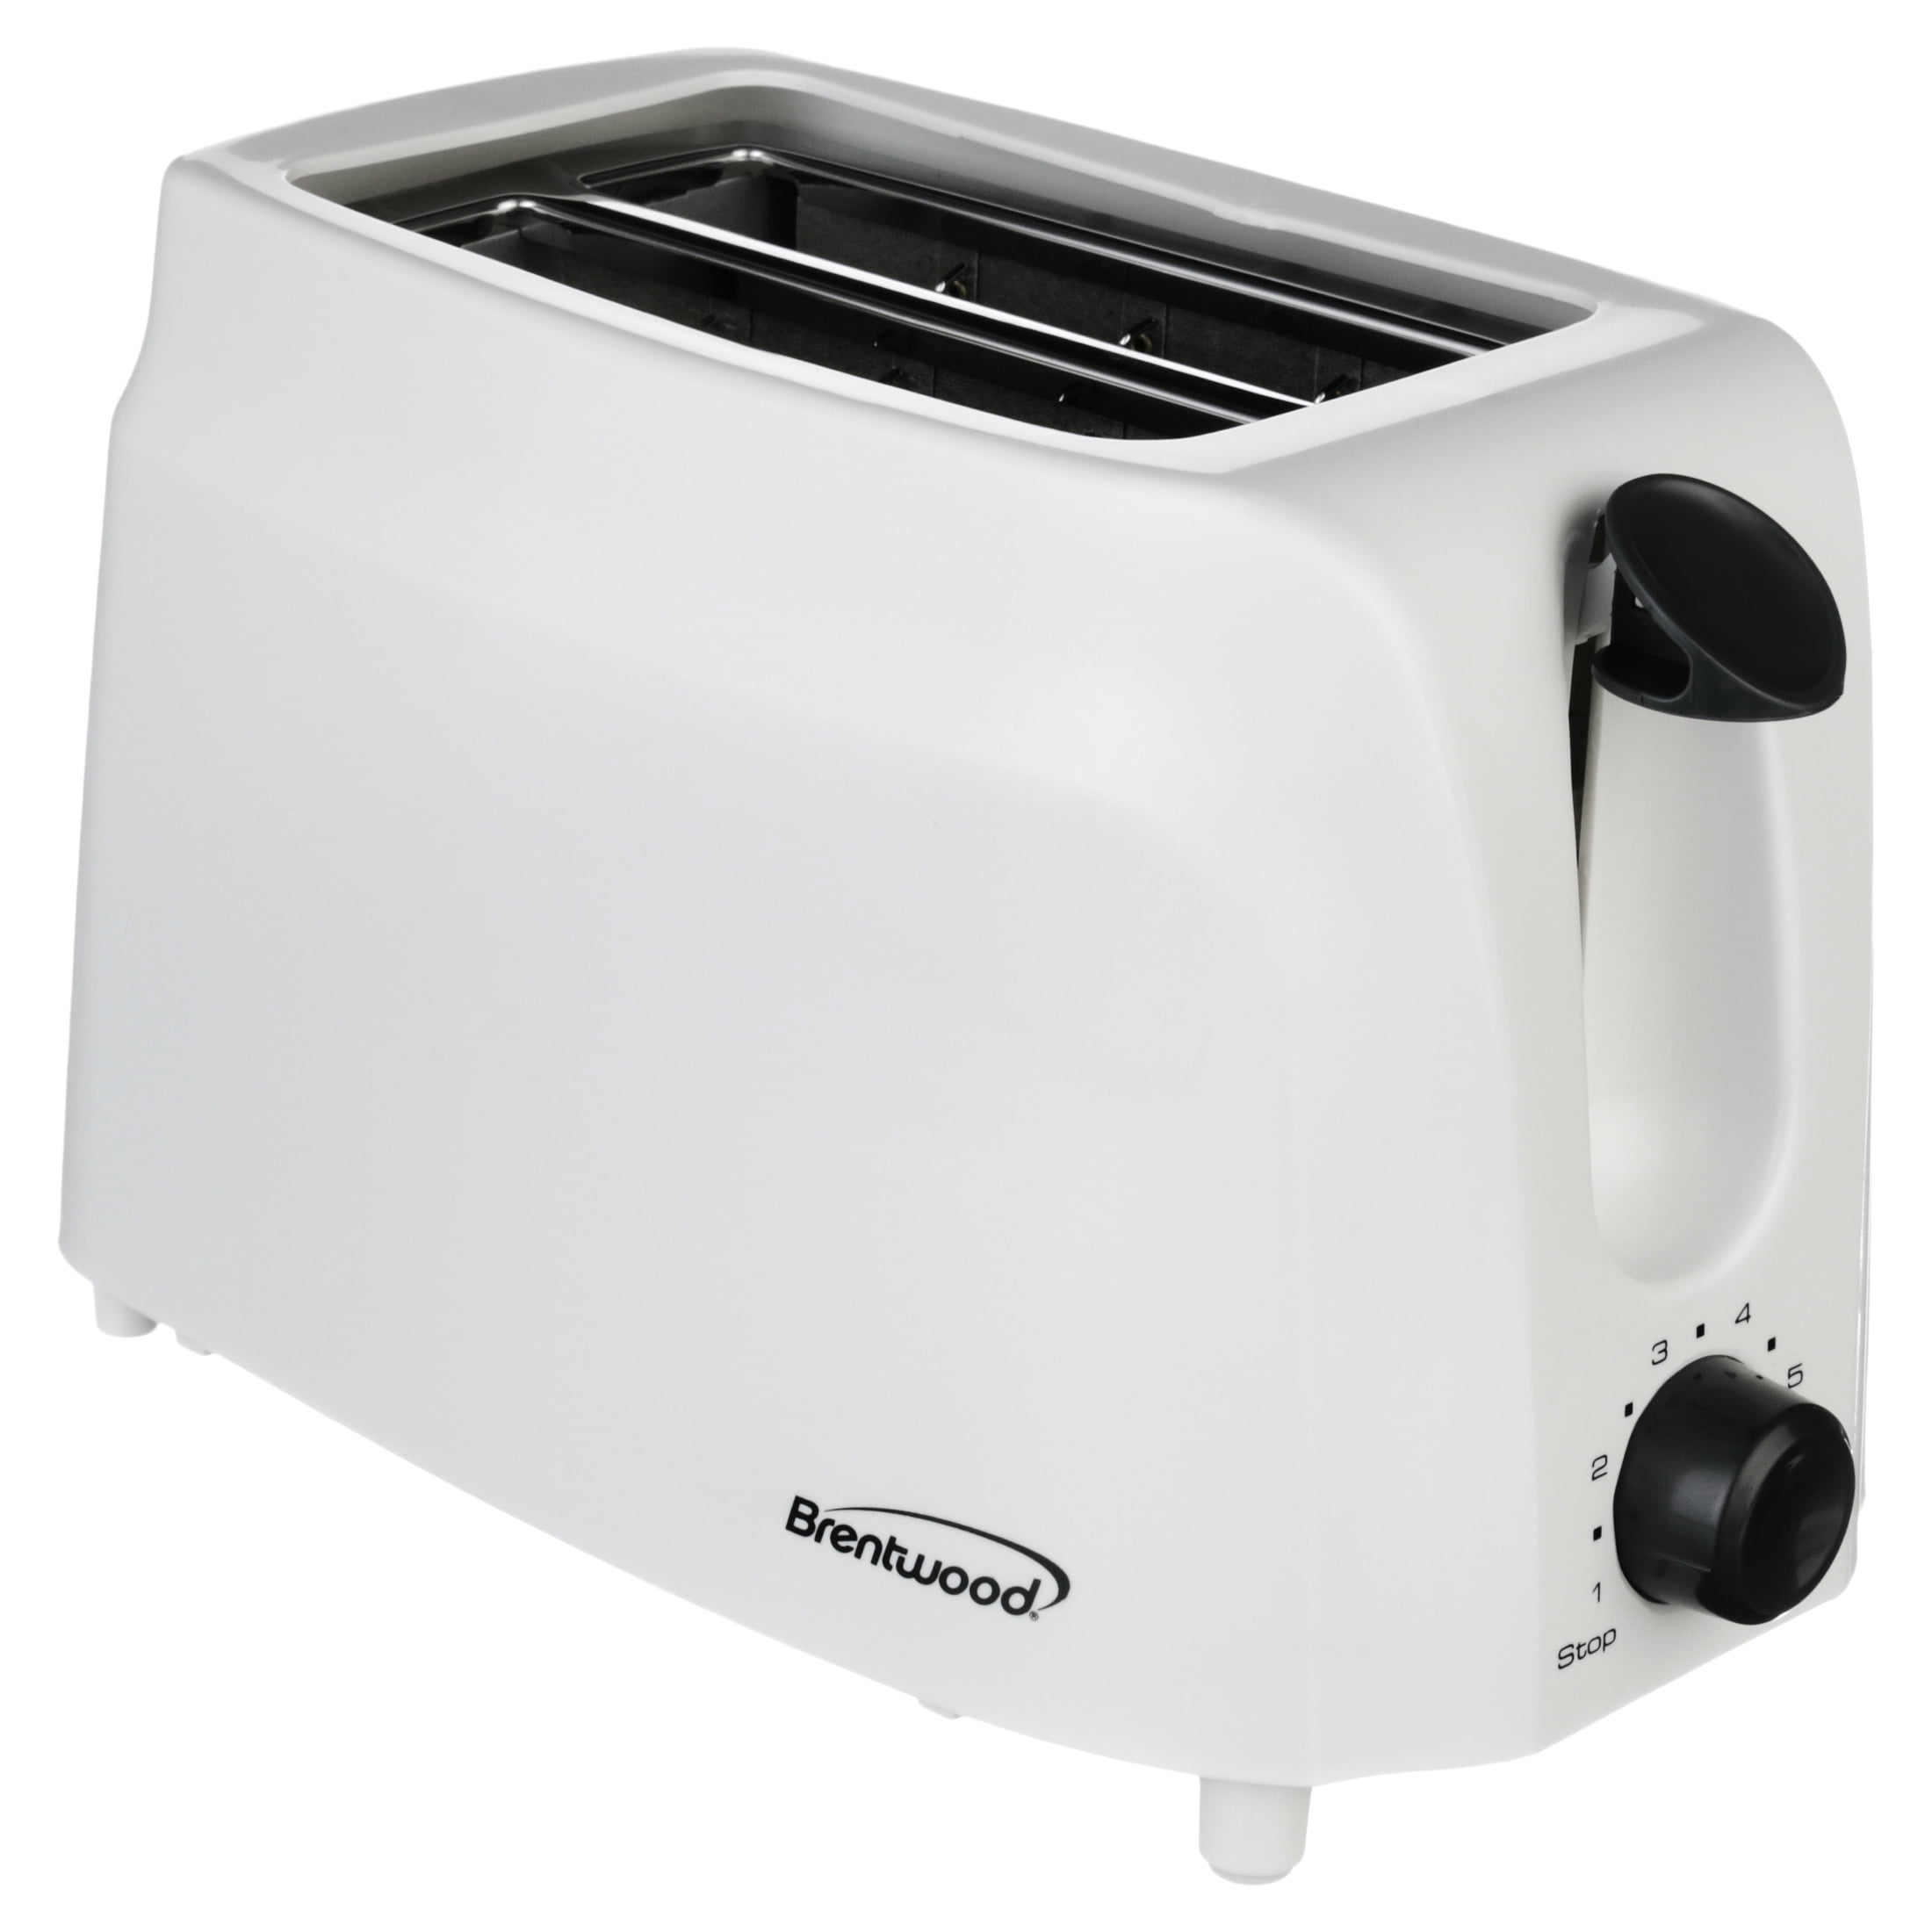 BRAND NEW Brentwood Appliances TS-260W 2-Slice Cool Touch Toaster White 